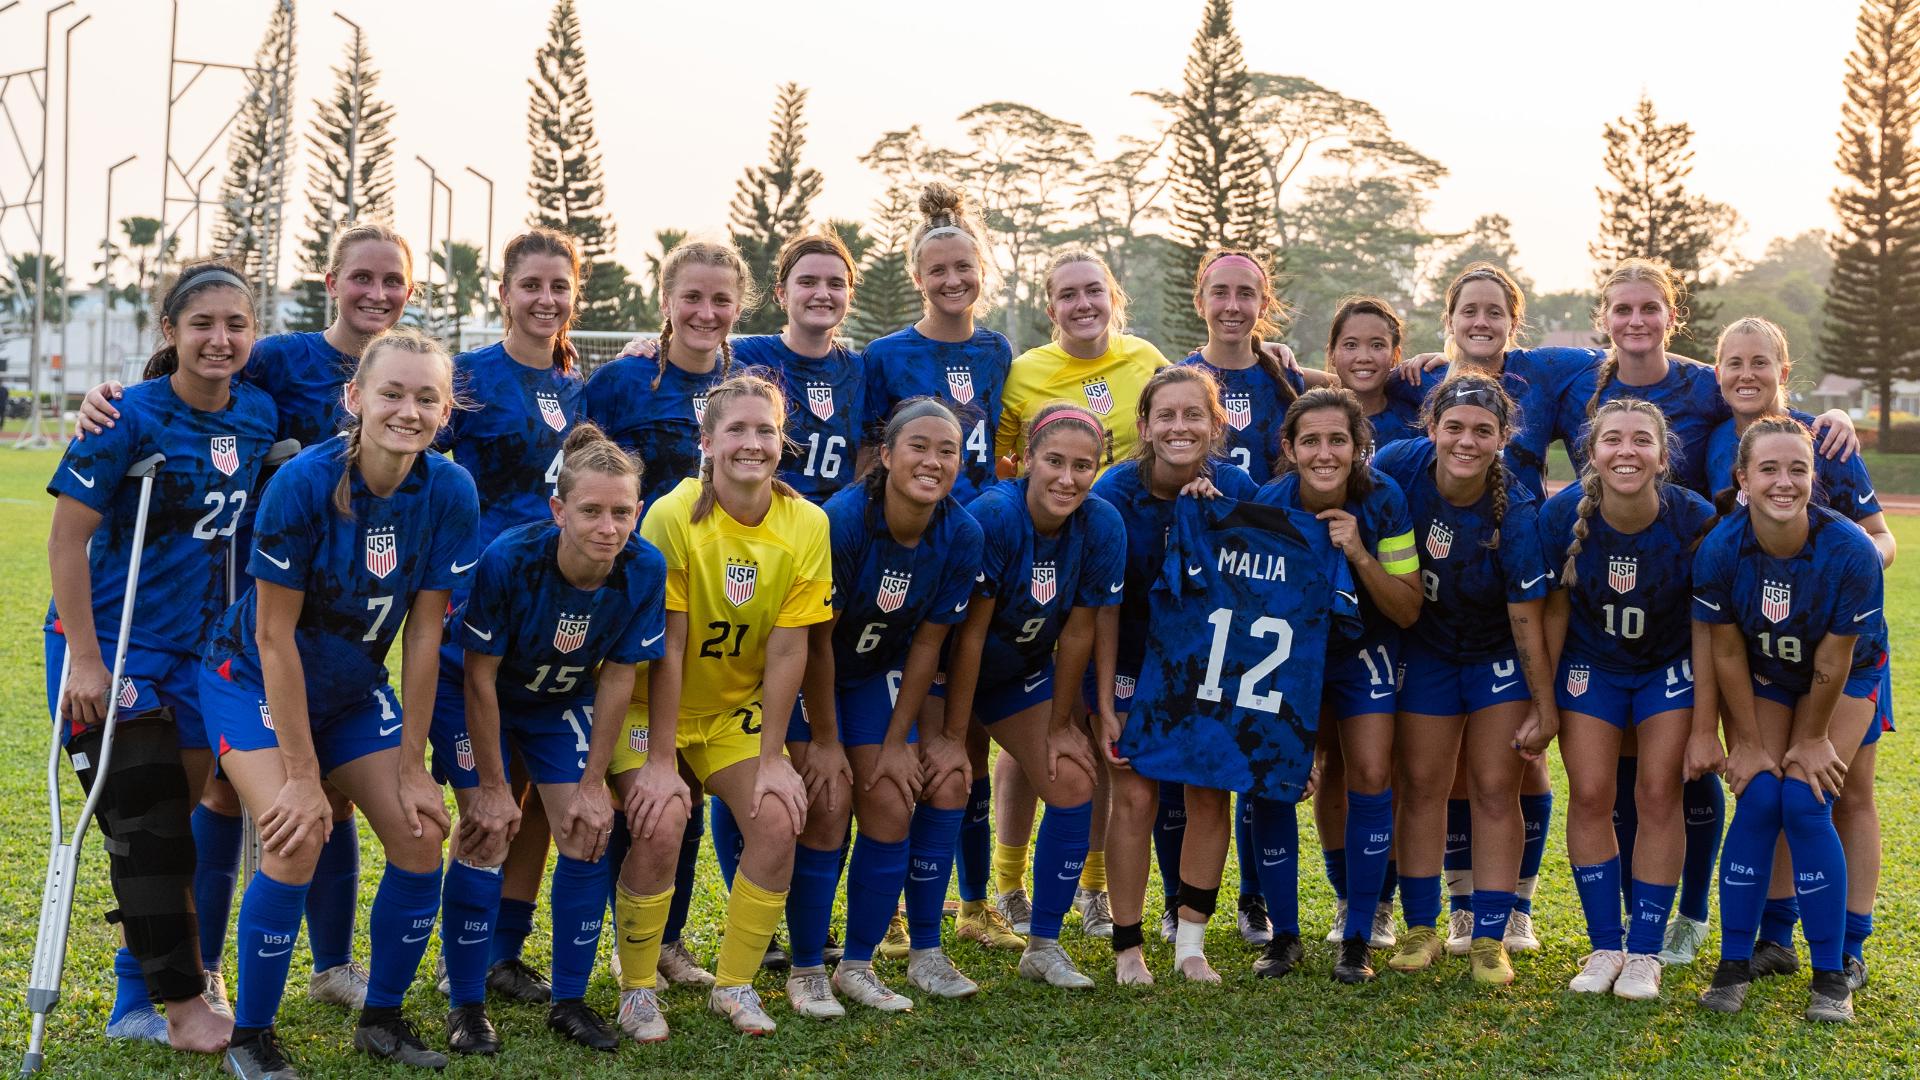 The U.S. Women’s Deaf National Team faces off with Australia in the first-ever nationally televised deaf soccer competition. Local stars hope this elevates the sport